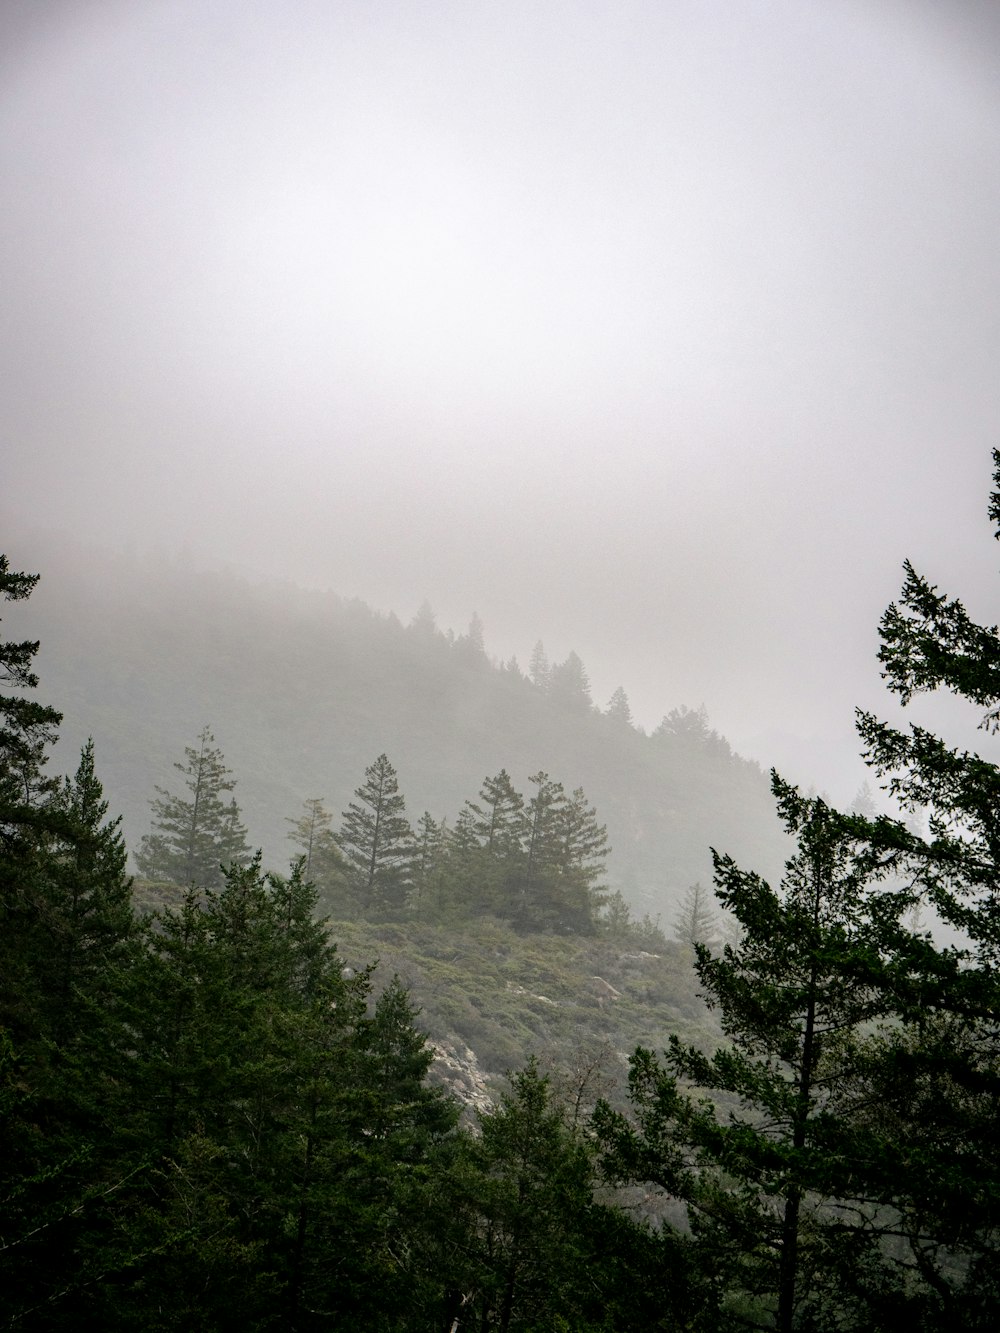 a foggy mountain with pine trees in the foreground